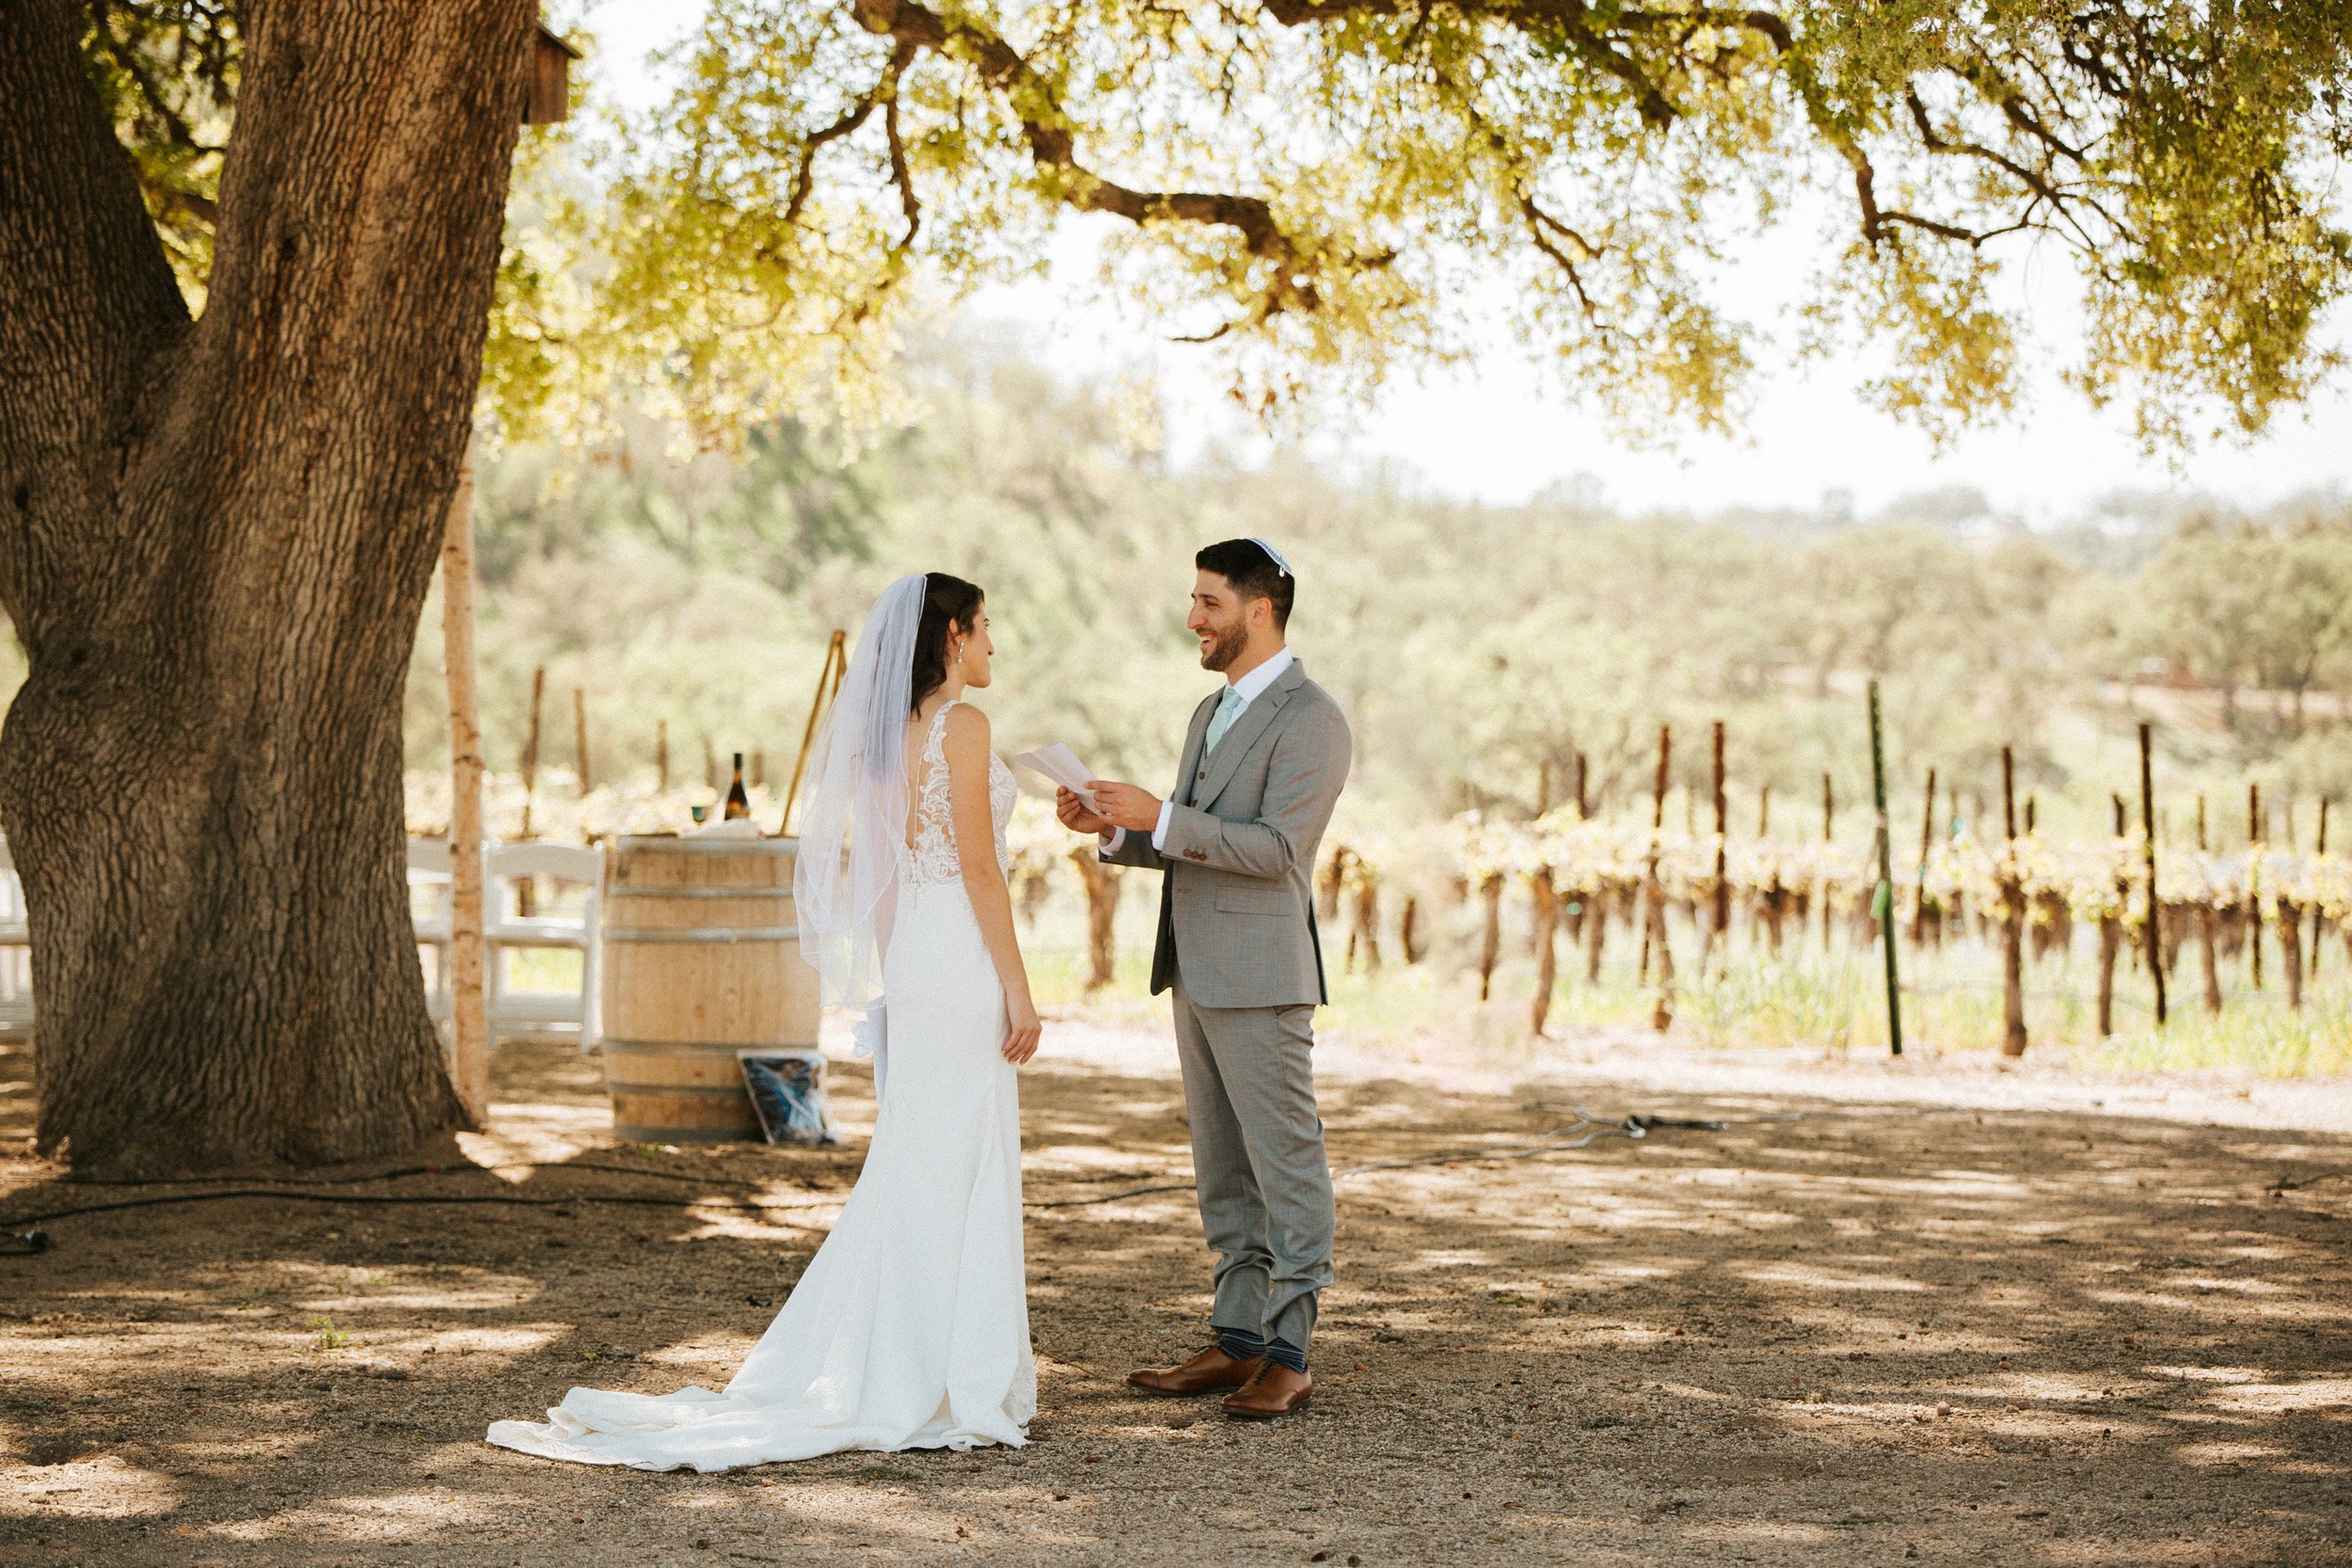 spring winery wedding in paso robles cass winery napa wedding photographer poppy and vine (26).jpg